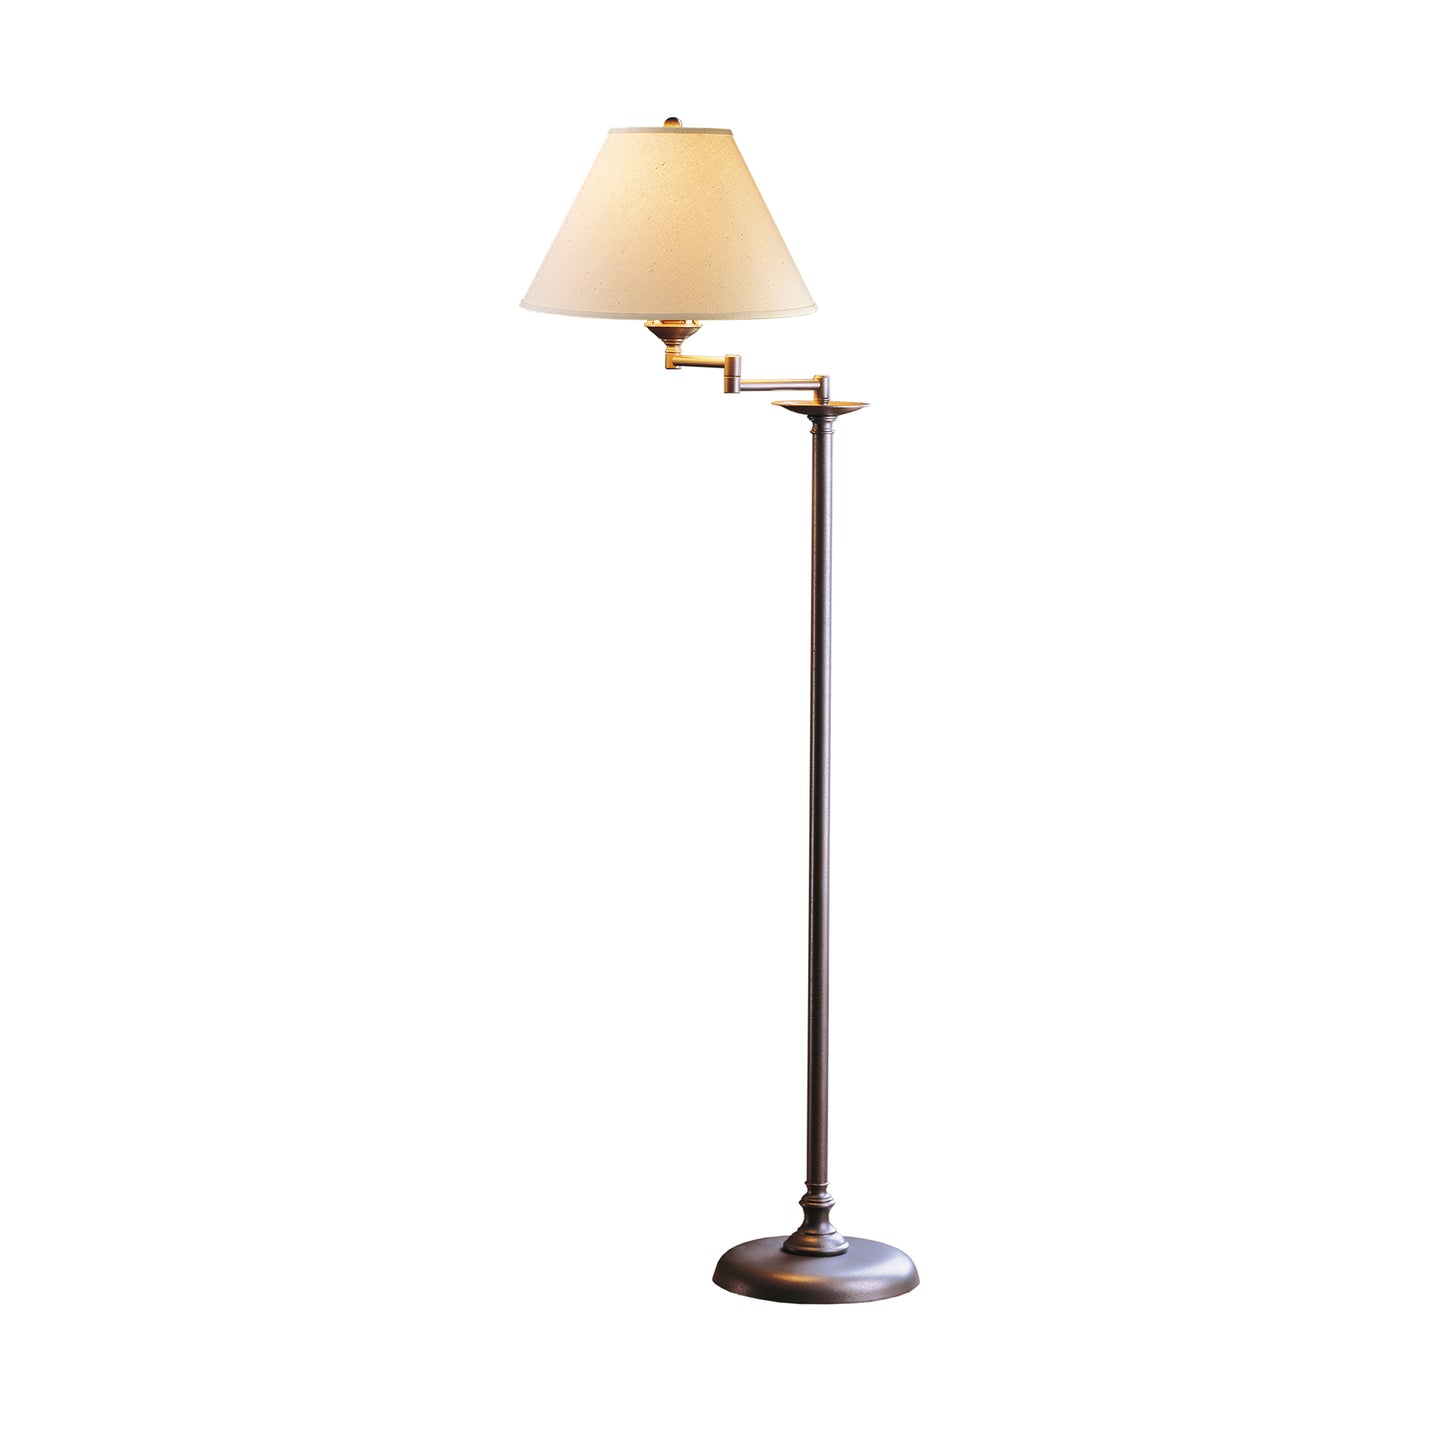 A Simple Lines Swing Arm Floor Lamp with a beige shade on a white background becomes:
A Hubbardton Forge Simple Lines with Swing Arm Floor Lamp with a beige shade on a white background.